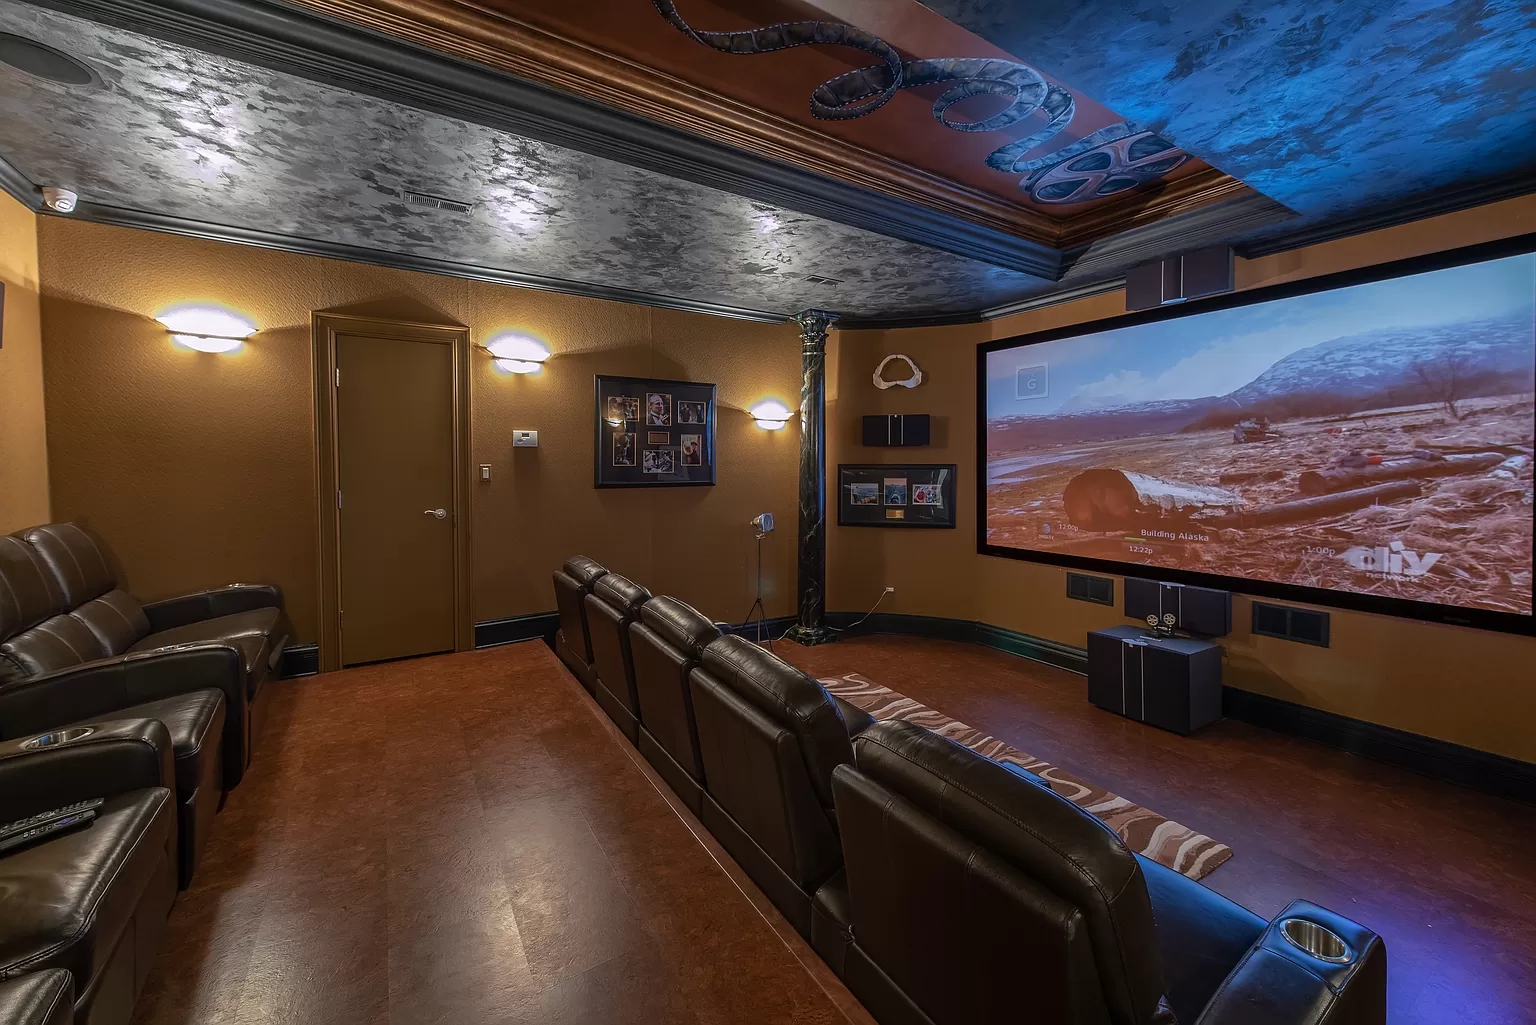 Modern Home Theater Design Service with Simple Decor